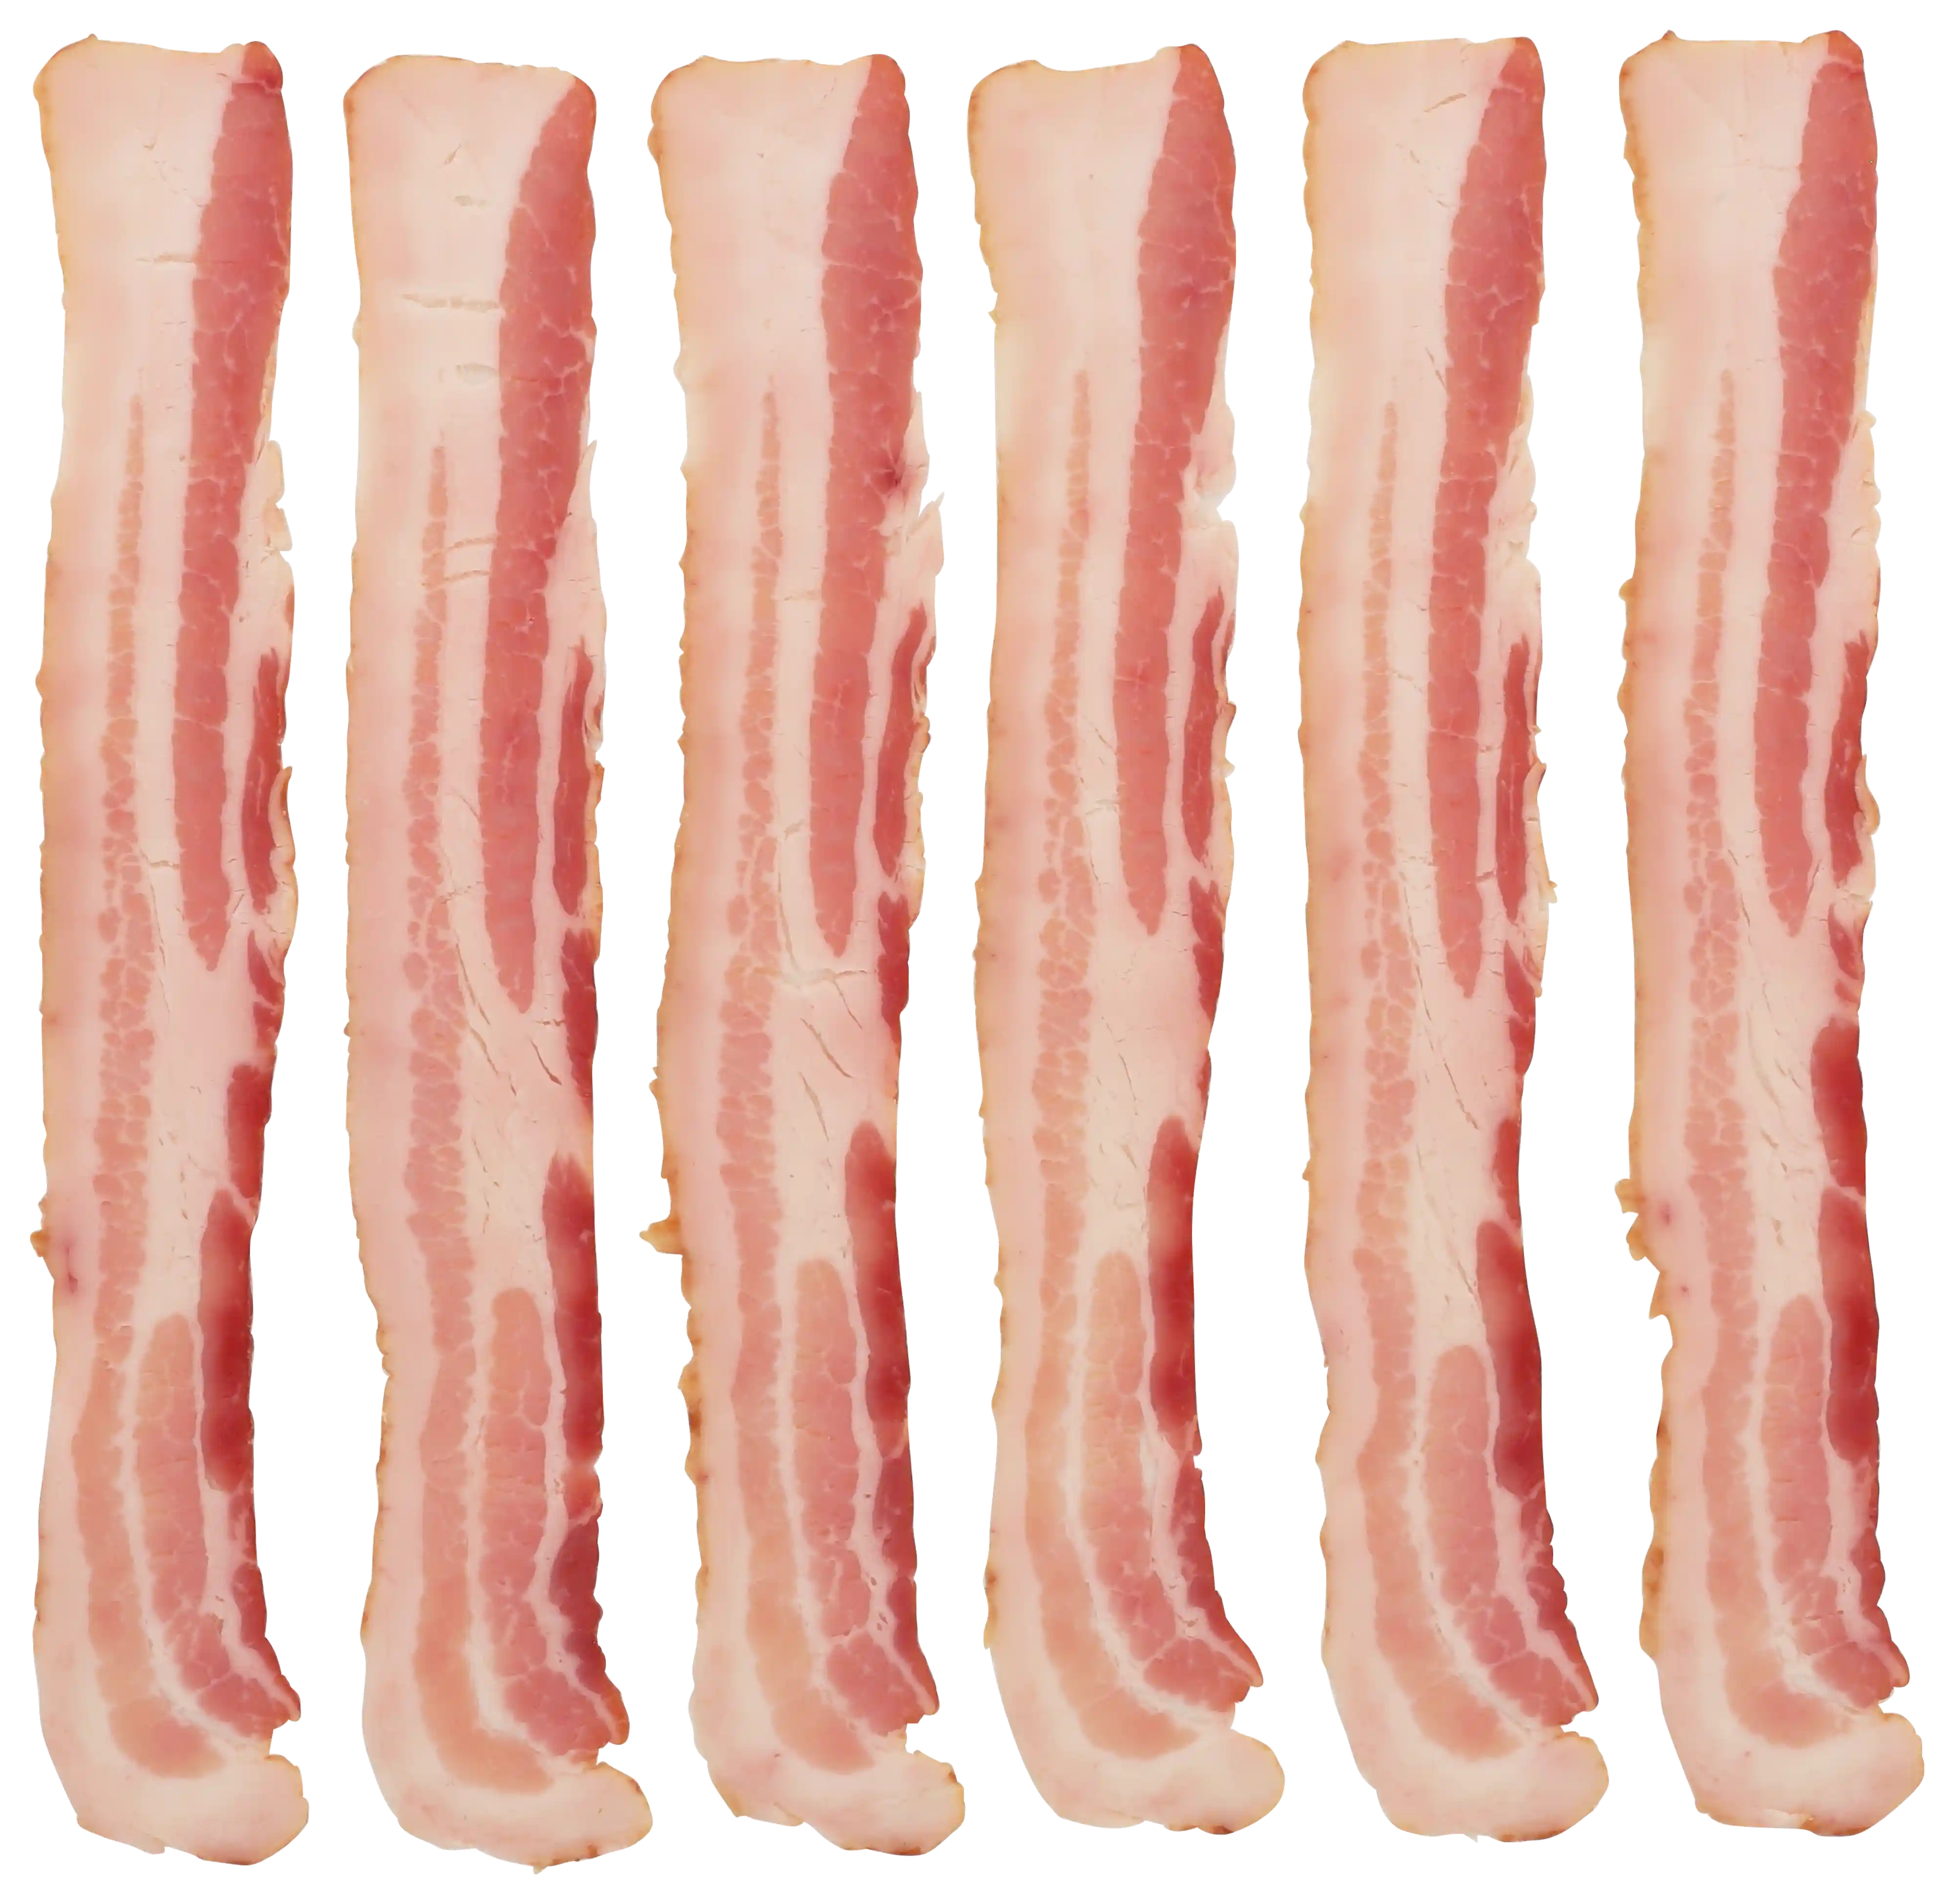 Wright® Brand Naturally Applewood Smoked Thick Sliced Bacon, Flat-Pack®, 15 Lbs, 10-14 Slices Per Pound, Gas Flushed_image_21